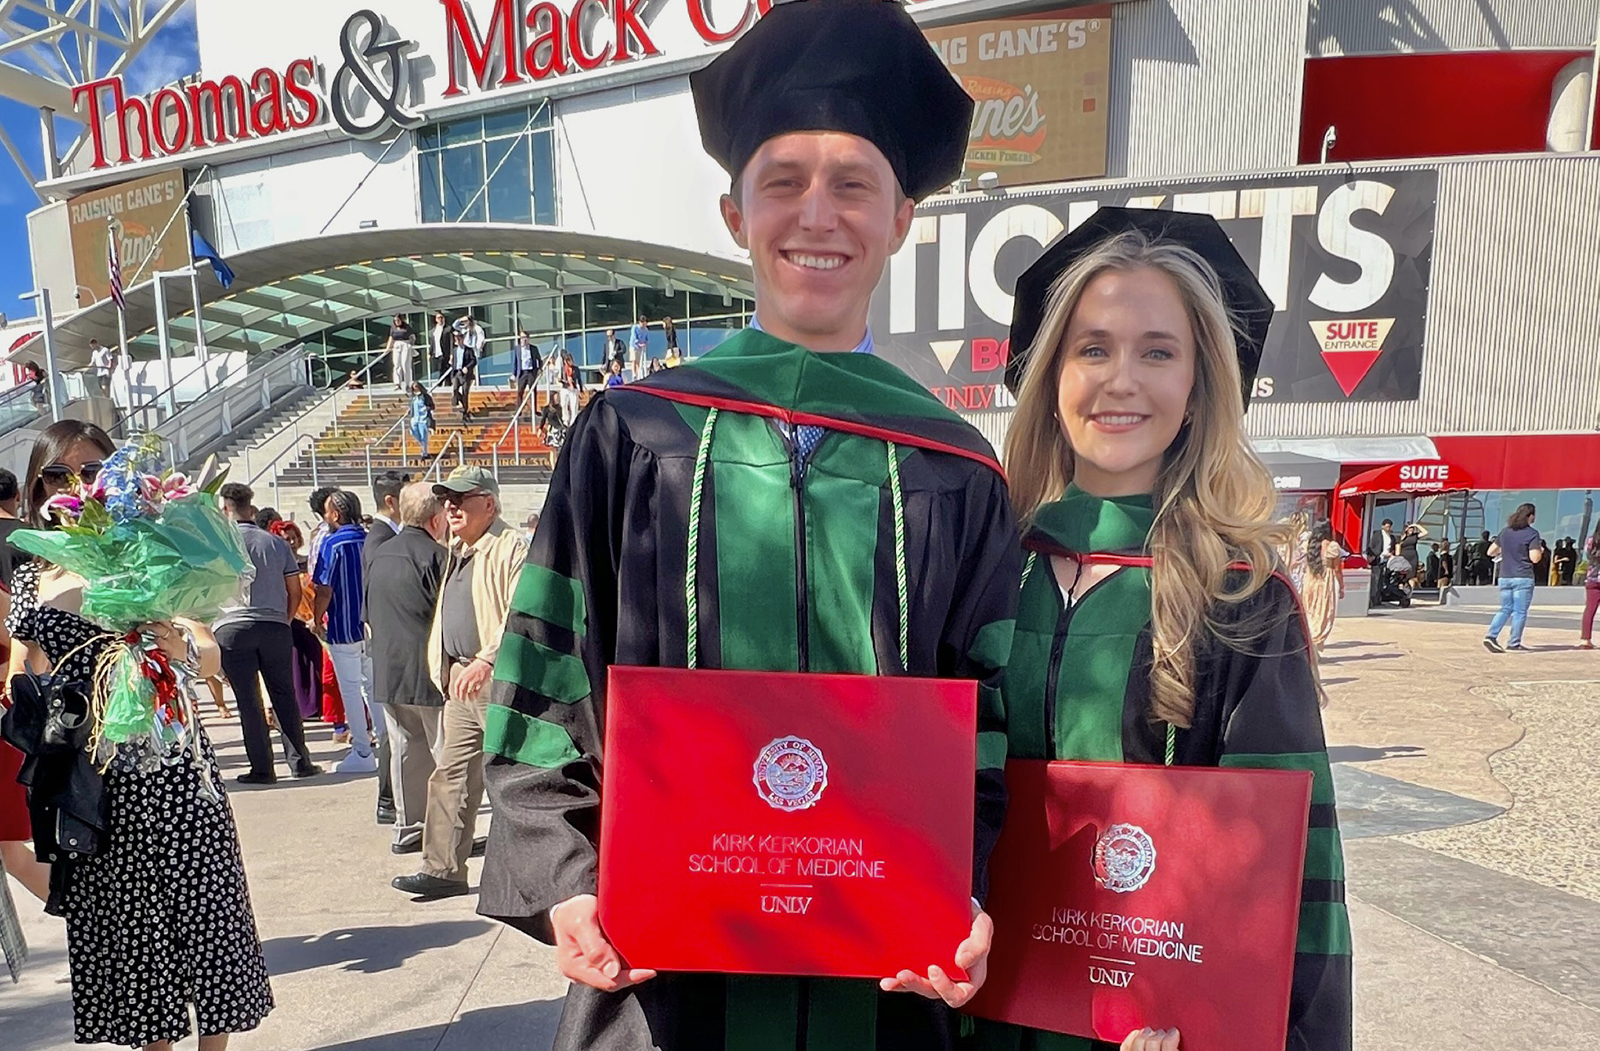 Dr. Eisenberg and her husband Matthew at the Kirk Kerkorian School of Medicine at the University of Nevada, Las Vegas' Commencement ceremony